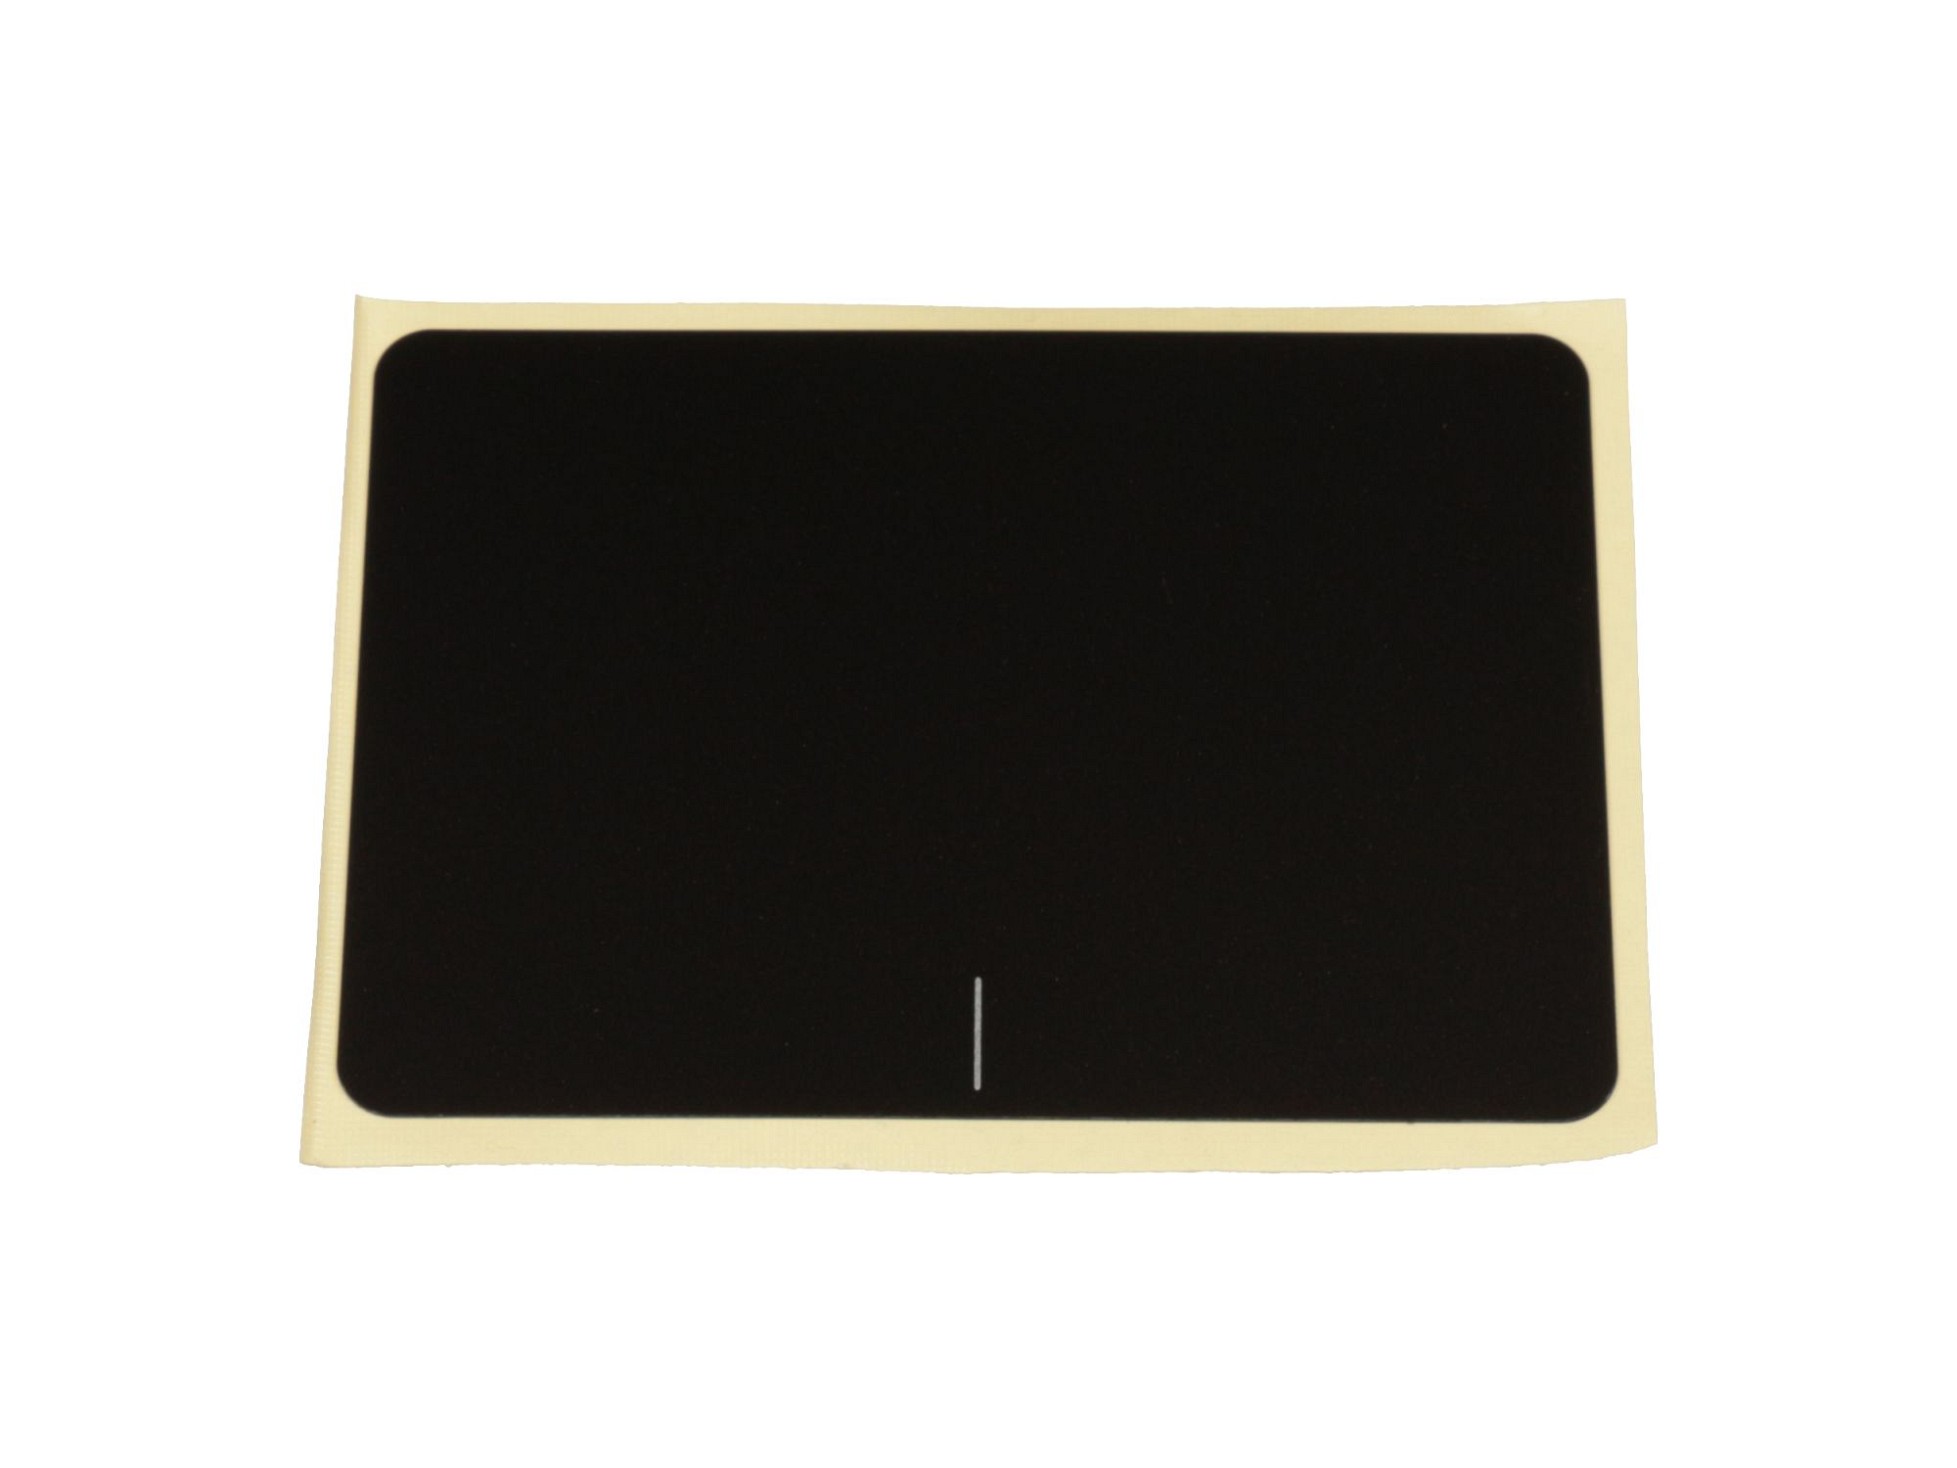 Touchpad-Cover für Asus F756UX